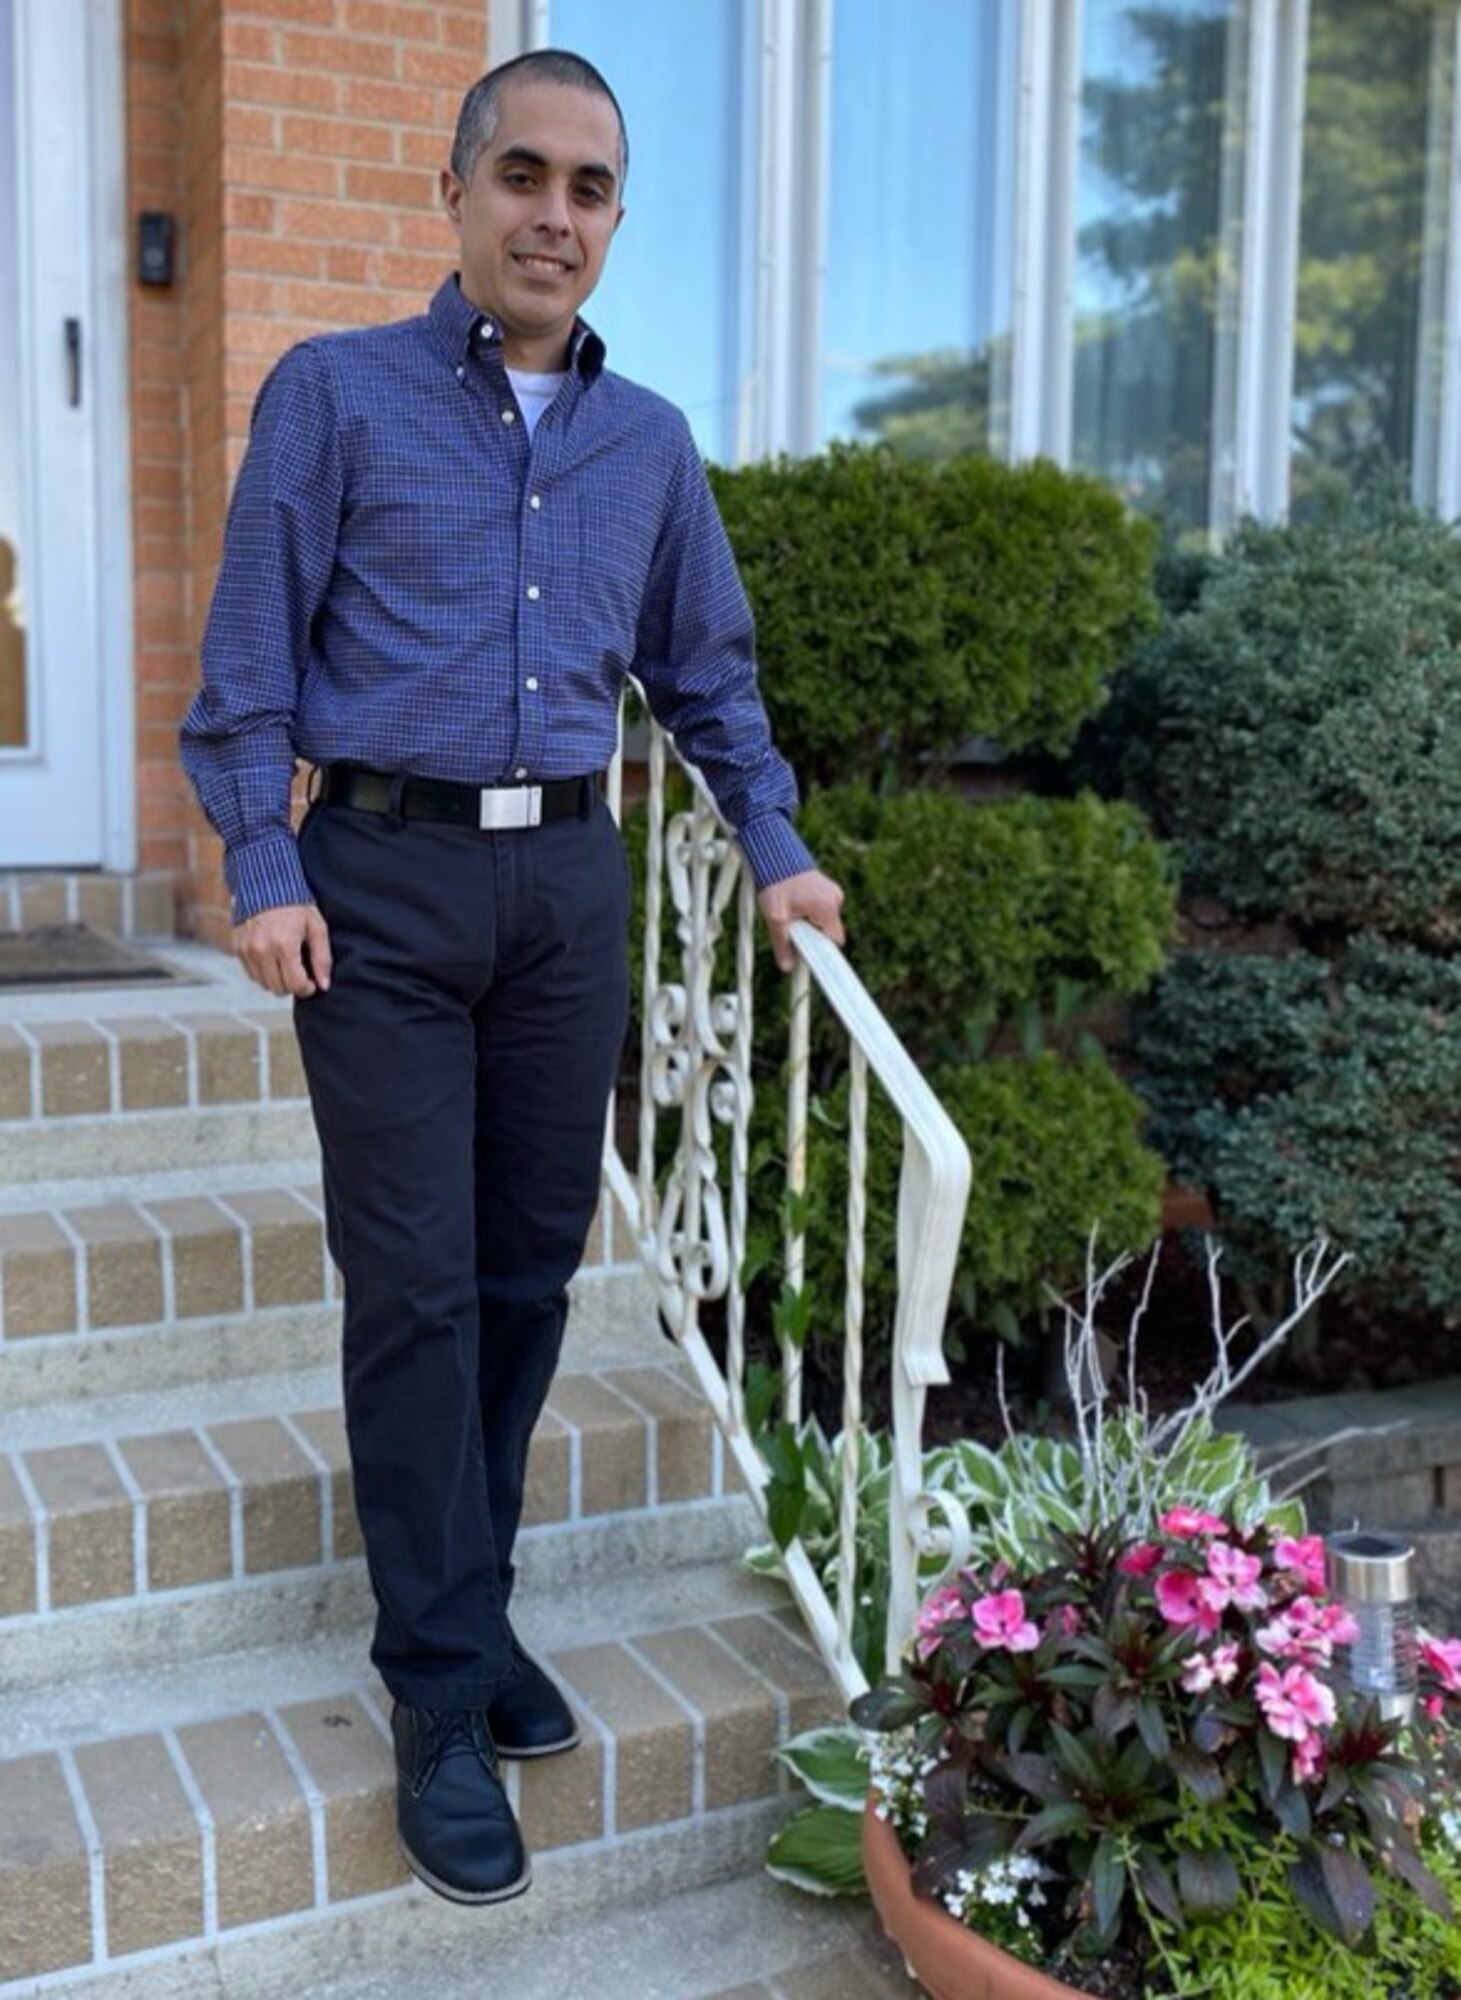 Tech. Sgt. Brandon Ibanez, a cyber intelligence analyst with the 854th Combat Operations Squadron, stands for a photo outside his home in Chicago, Illinois, June 15, 2020. In his civilian career, he works for a biopharmaceutical company that develops and manufactures a variety of therapies for patients. (Courtesy photo by Anna Czekaj)